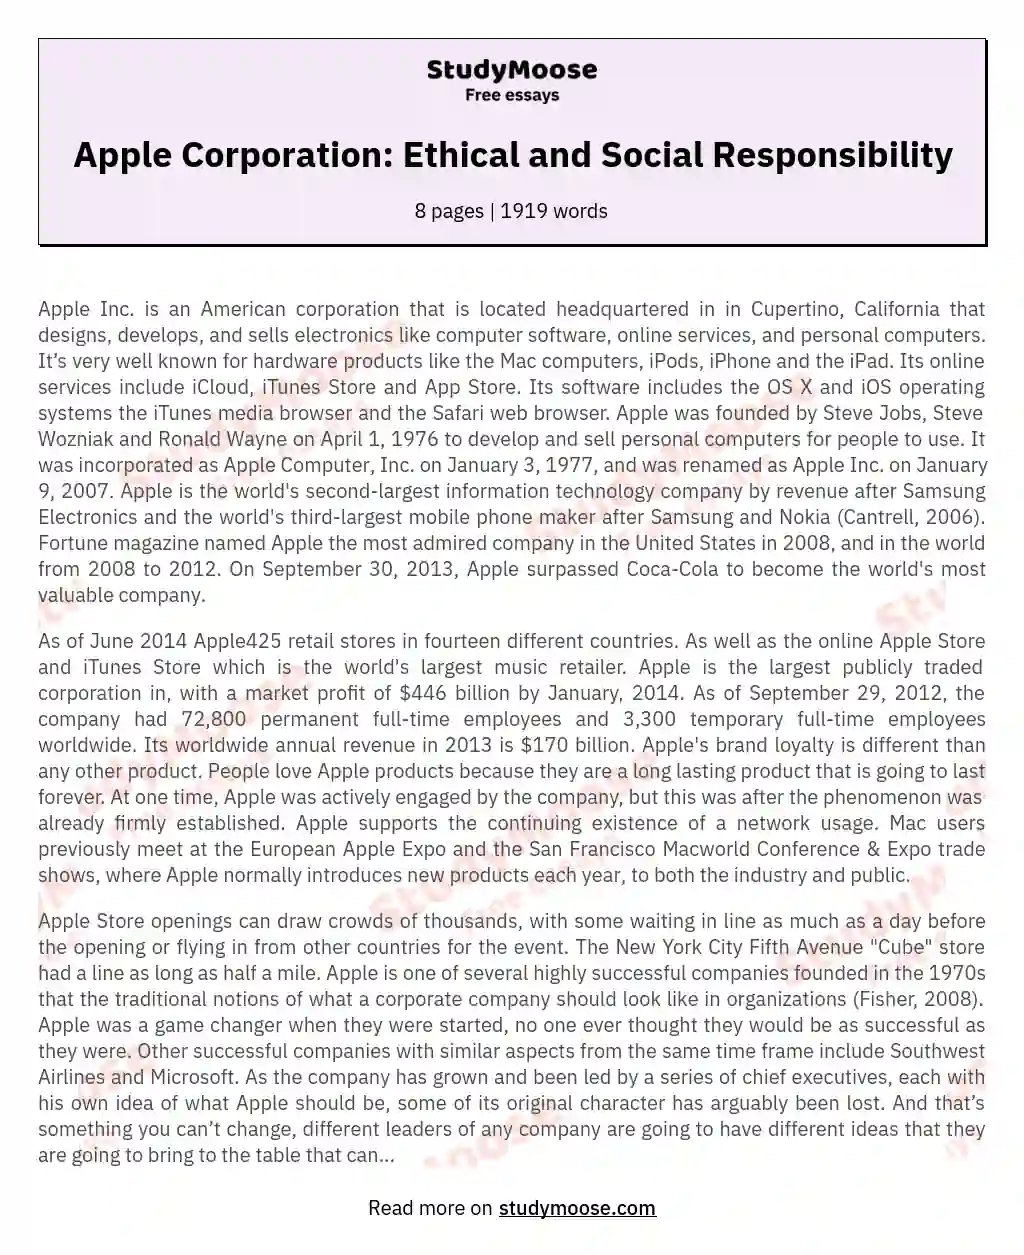 Apple Corporation: Ethical and Social Responsibility essay